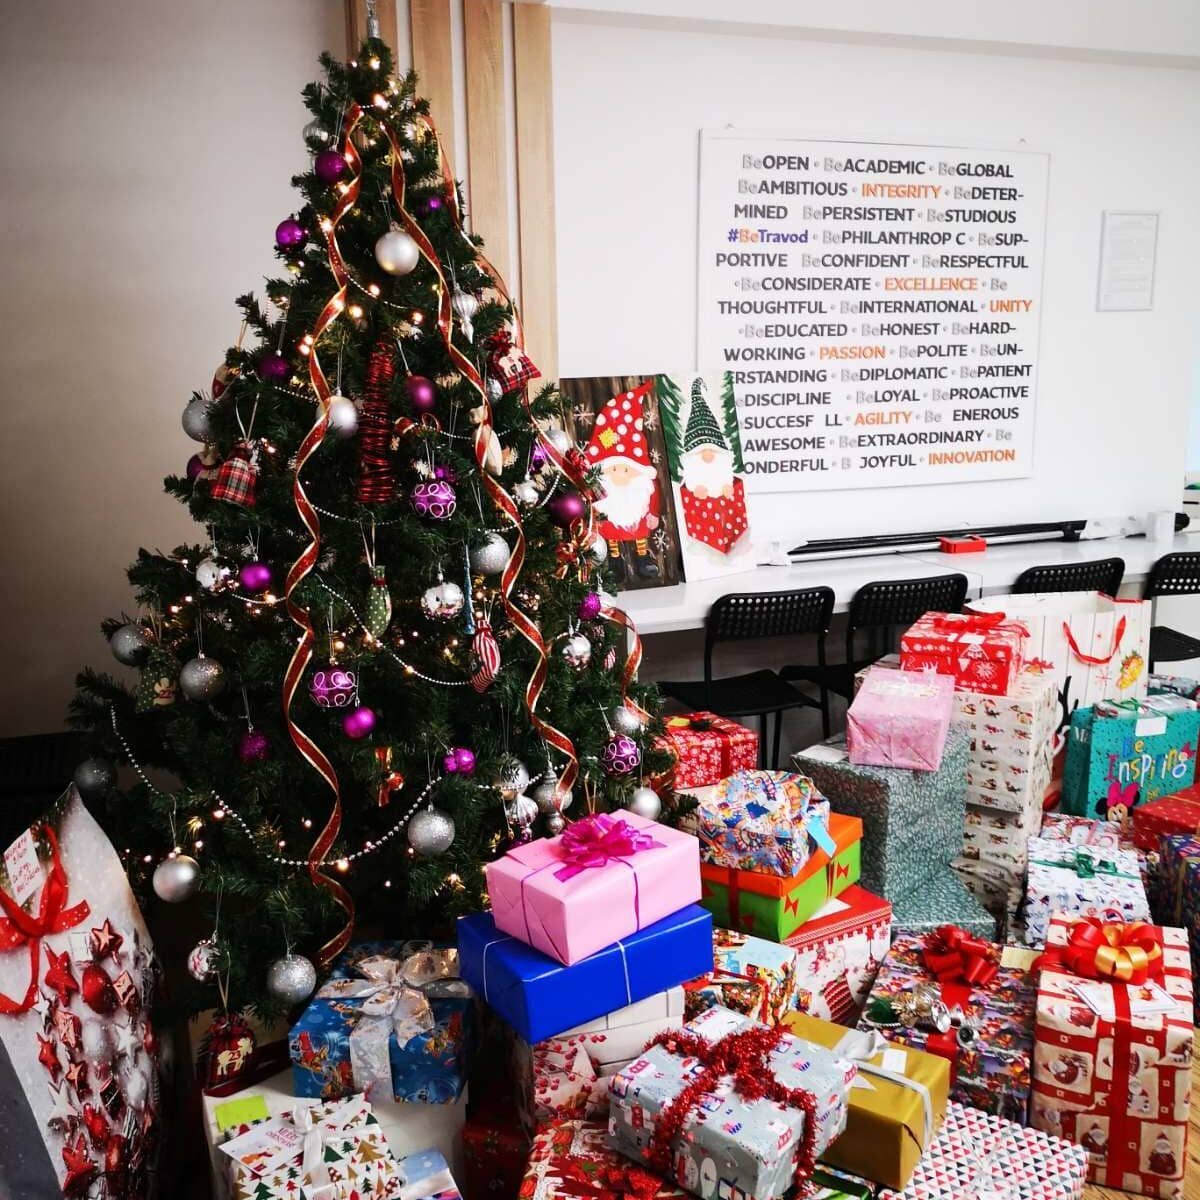 We were once again Santa&rsquo;s 🎅 little helpers -  participants of The Moldova Project 🙌! Can&rsquo;t wait to see the smiles on the children&rsquo;s 🧒 faces when they open their gifts 🎁!
#wecare #TheMoldovaProject #travodians